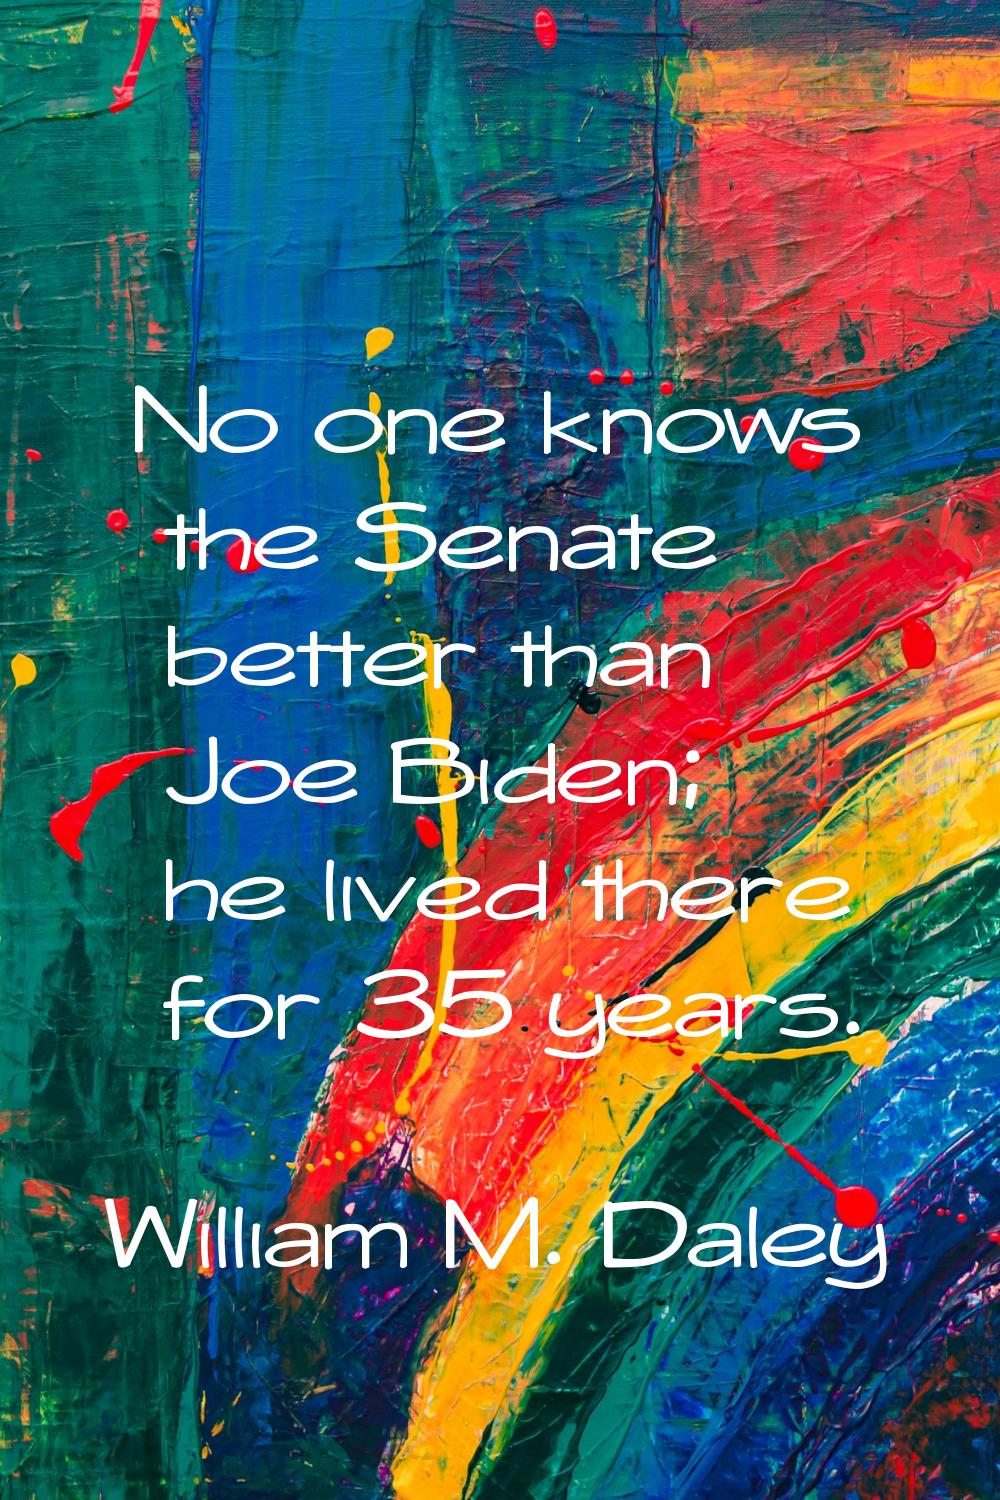 No one knows the Senate better than Joe Biden; he lived there for 35 years.